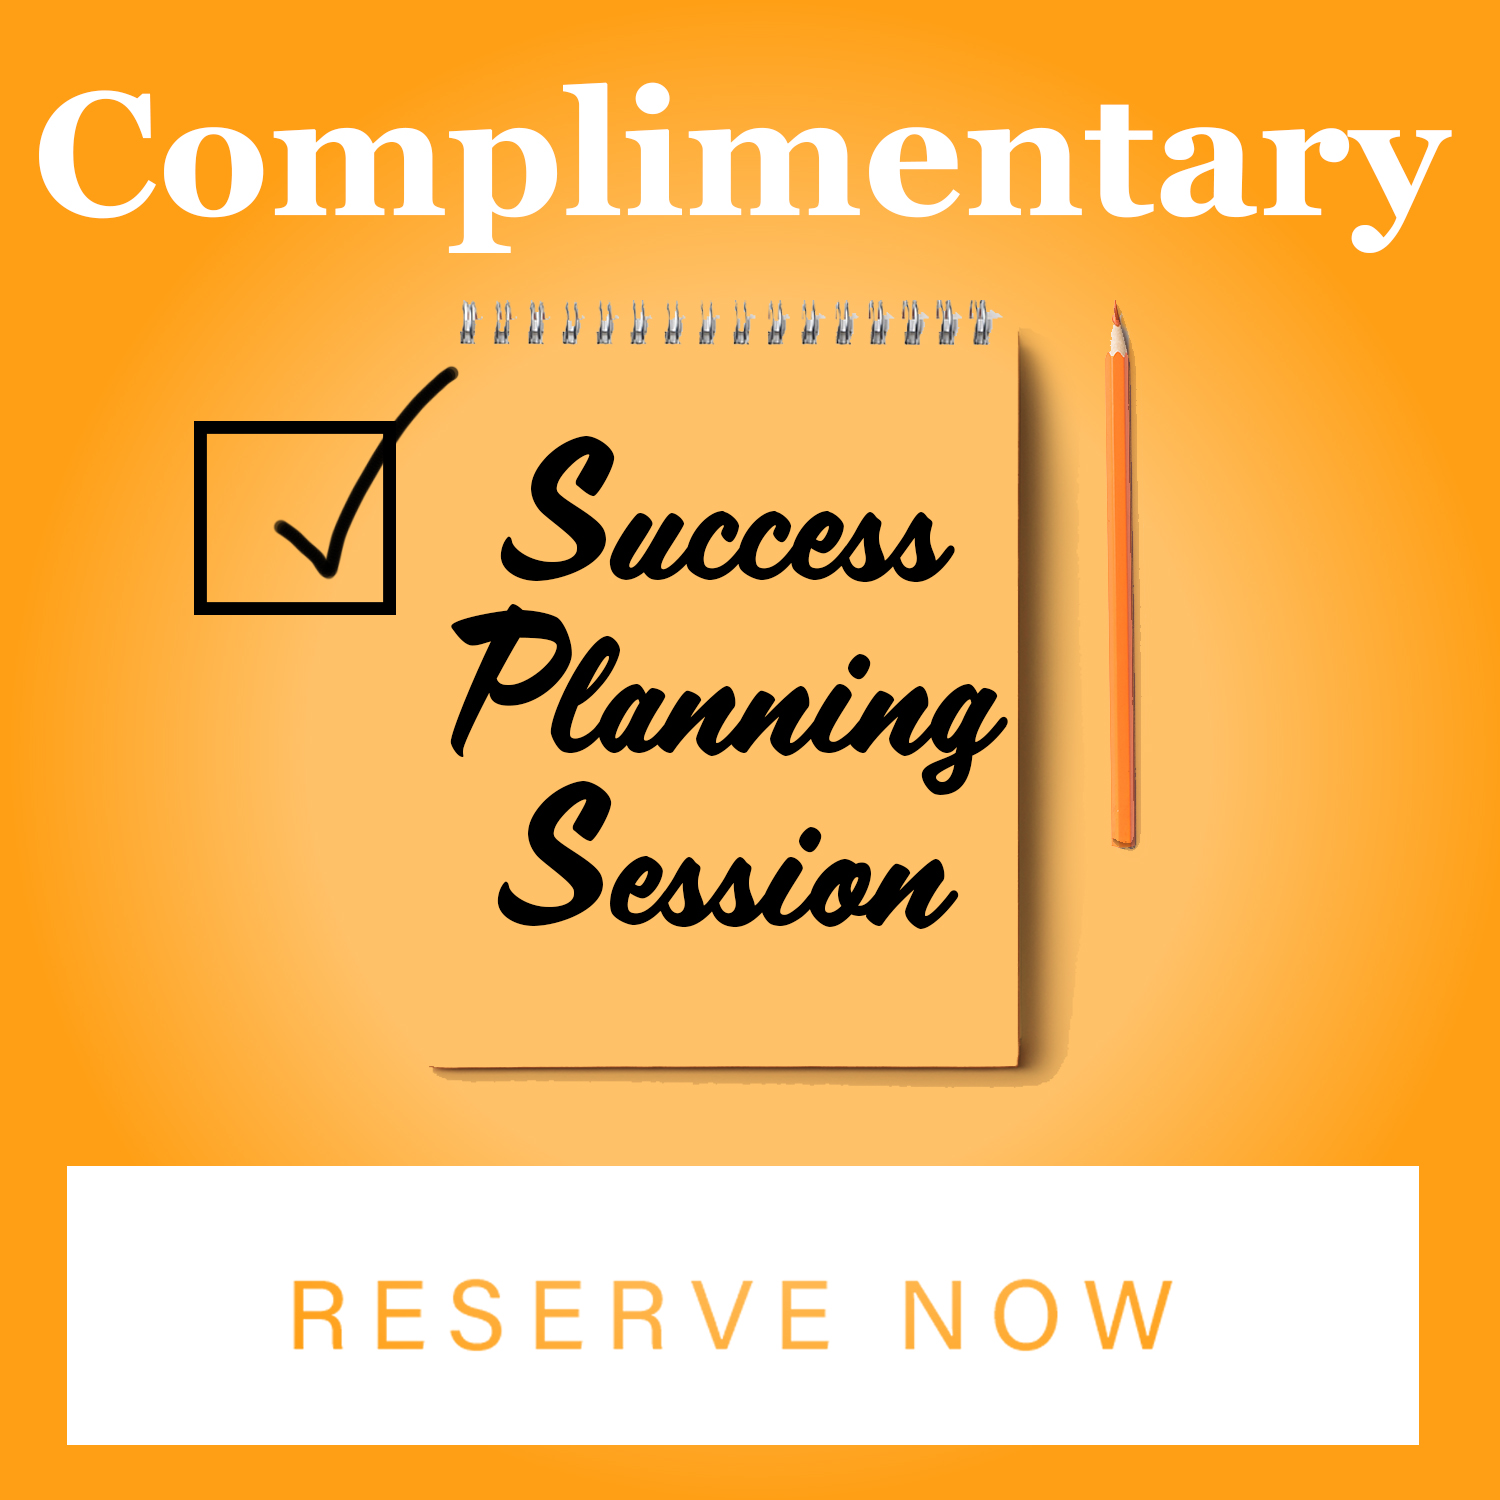 Complimentary Success Planning Session